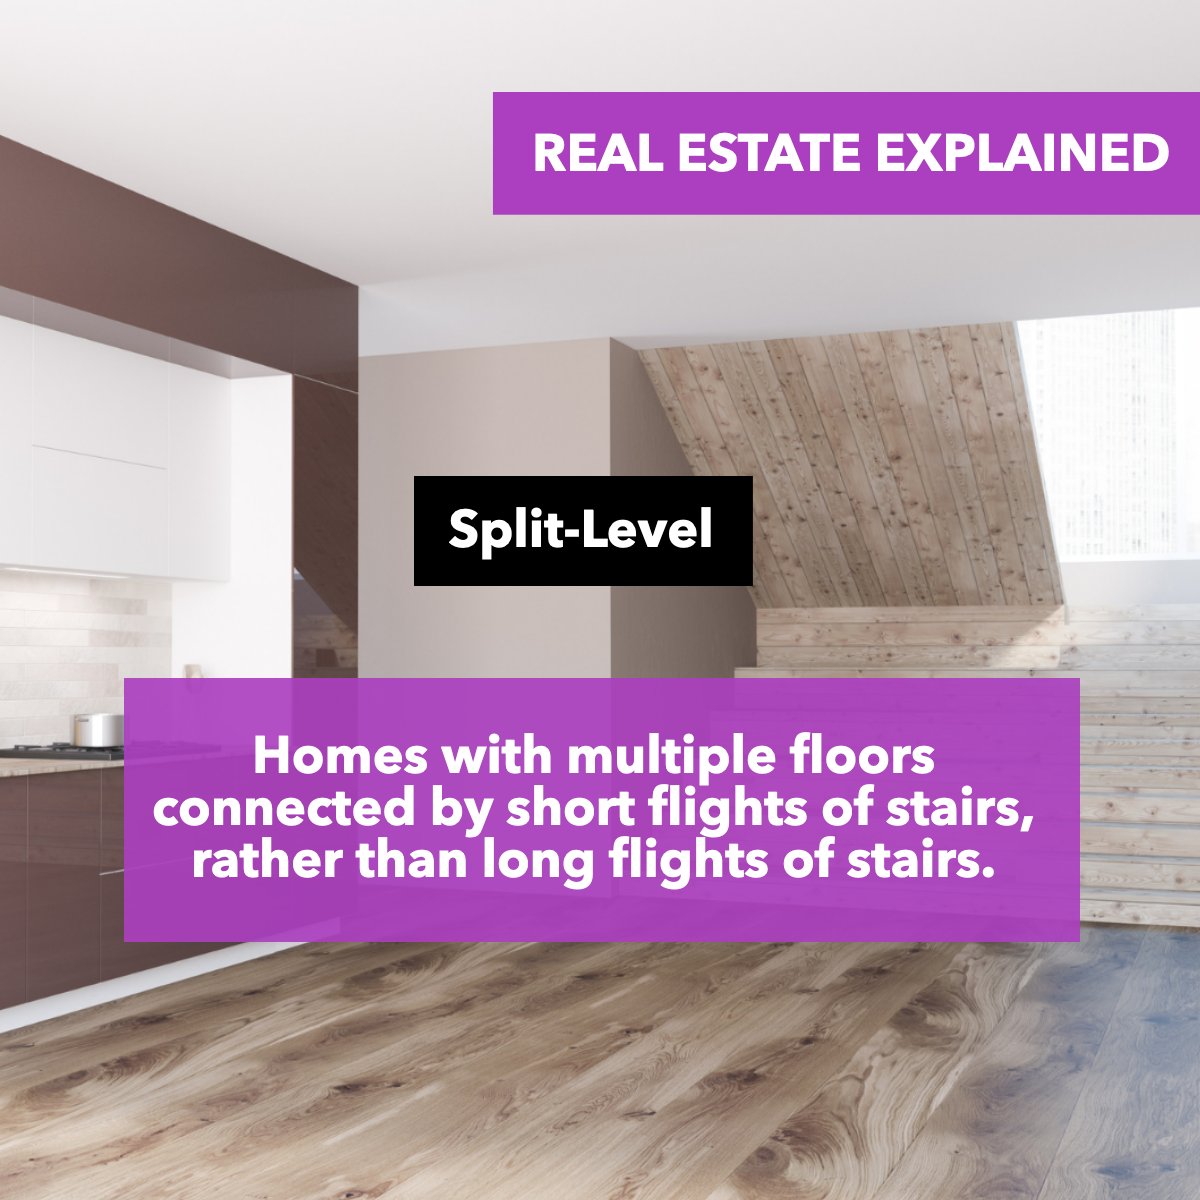 Did you know what a Spit-Level is? 🤔

Is this the type of house that you like?

#splitlevelremodel #splitlevelhome #splitleveldesign
 #veteranhomebuyers #militaryhomebuyers #veteransellinghome #militarysellinghome #PCSmove #militaryPCS #veteranrealtor